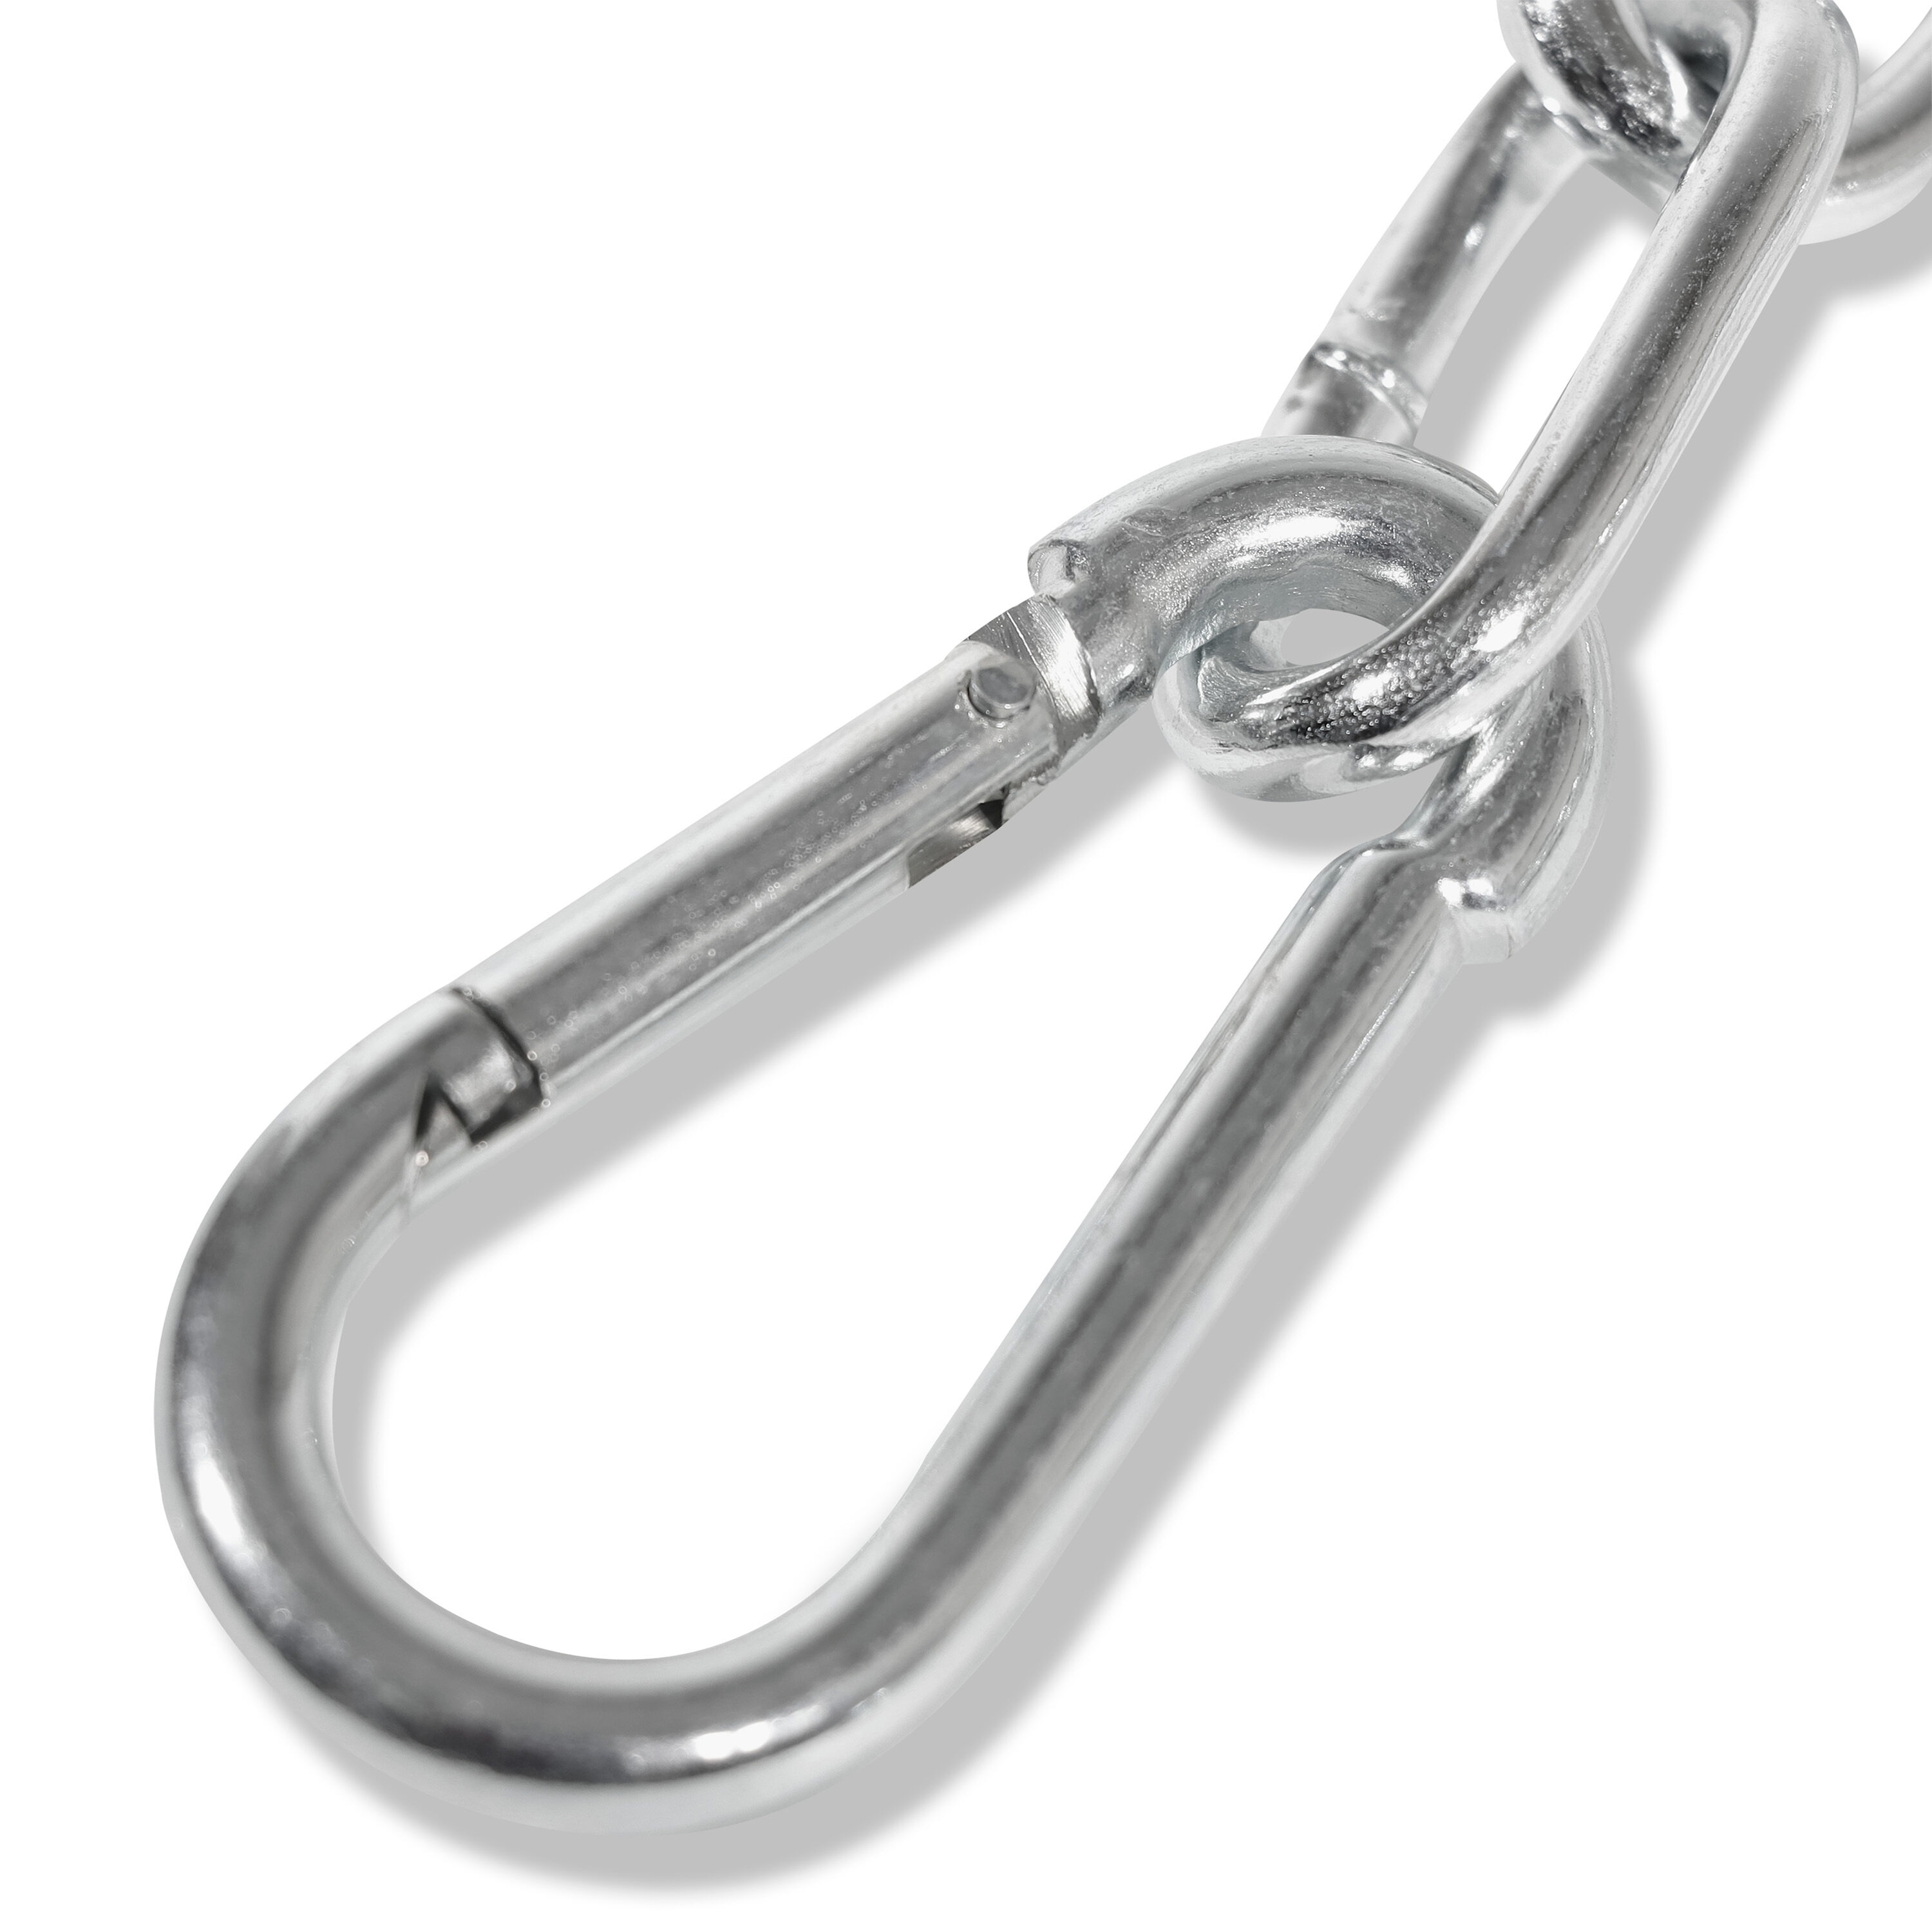 Trademark Innovations Heavy Bag Chains - 12-in Zinc Coated Steel